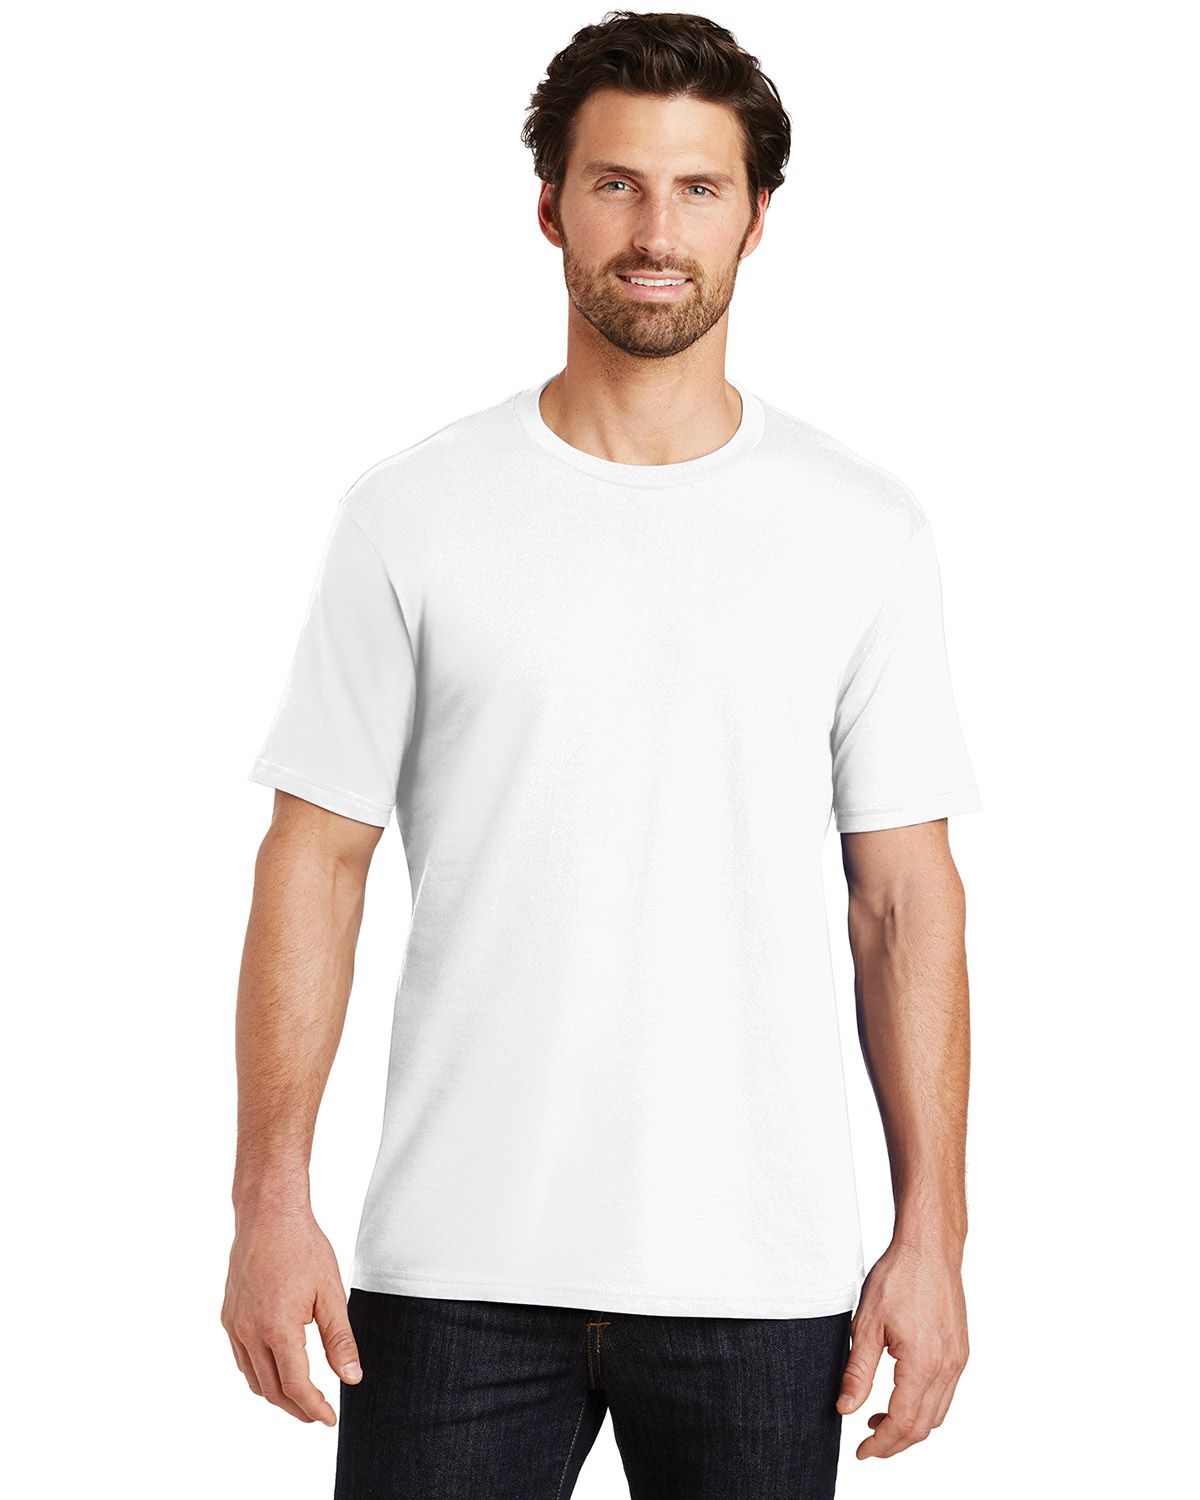 Buy District Made DT104 Short Sleeve Perfect Weight Crewneck Tee